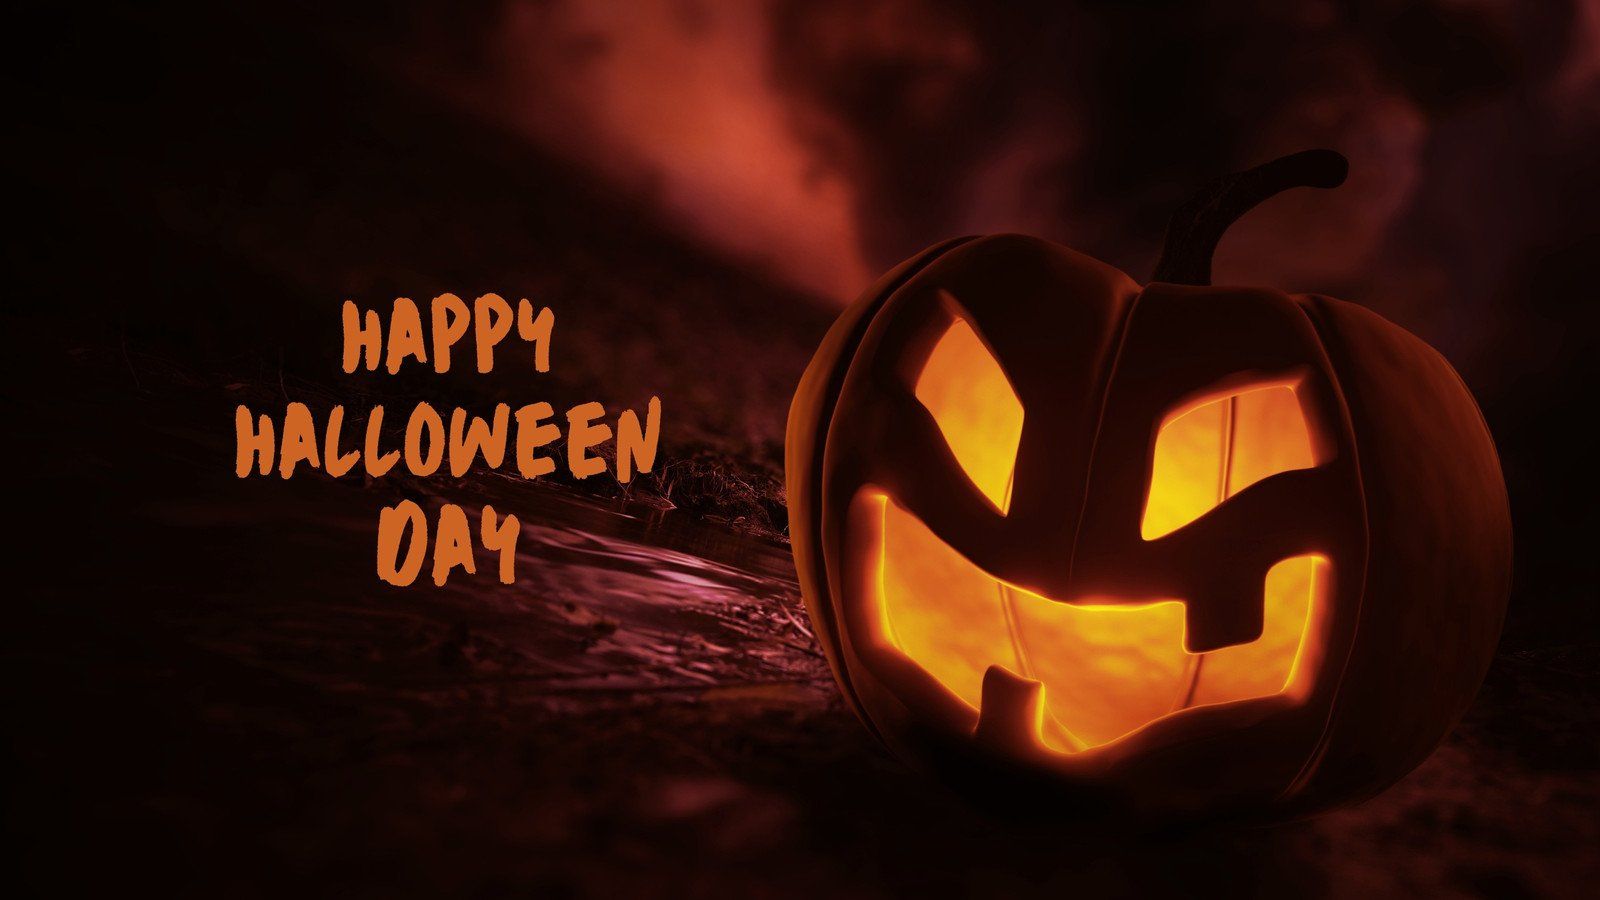 A pumpkin with a carved face and the words Happy Halloween Day - Halloween desktop